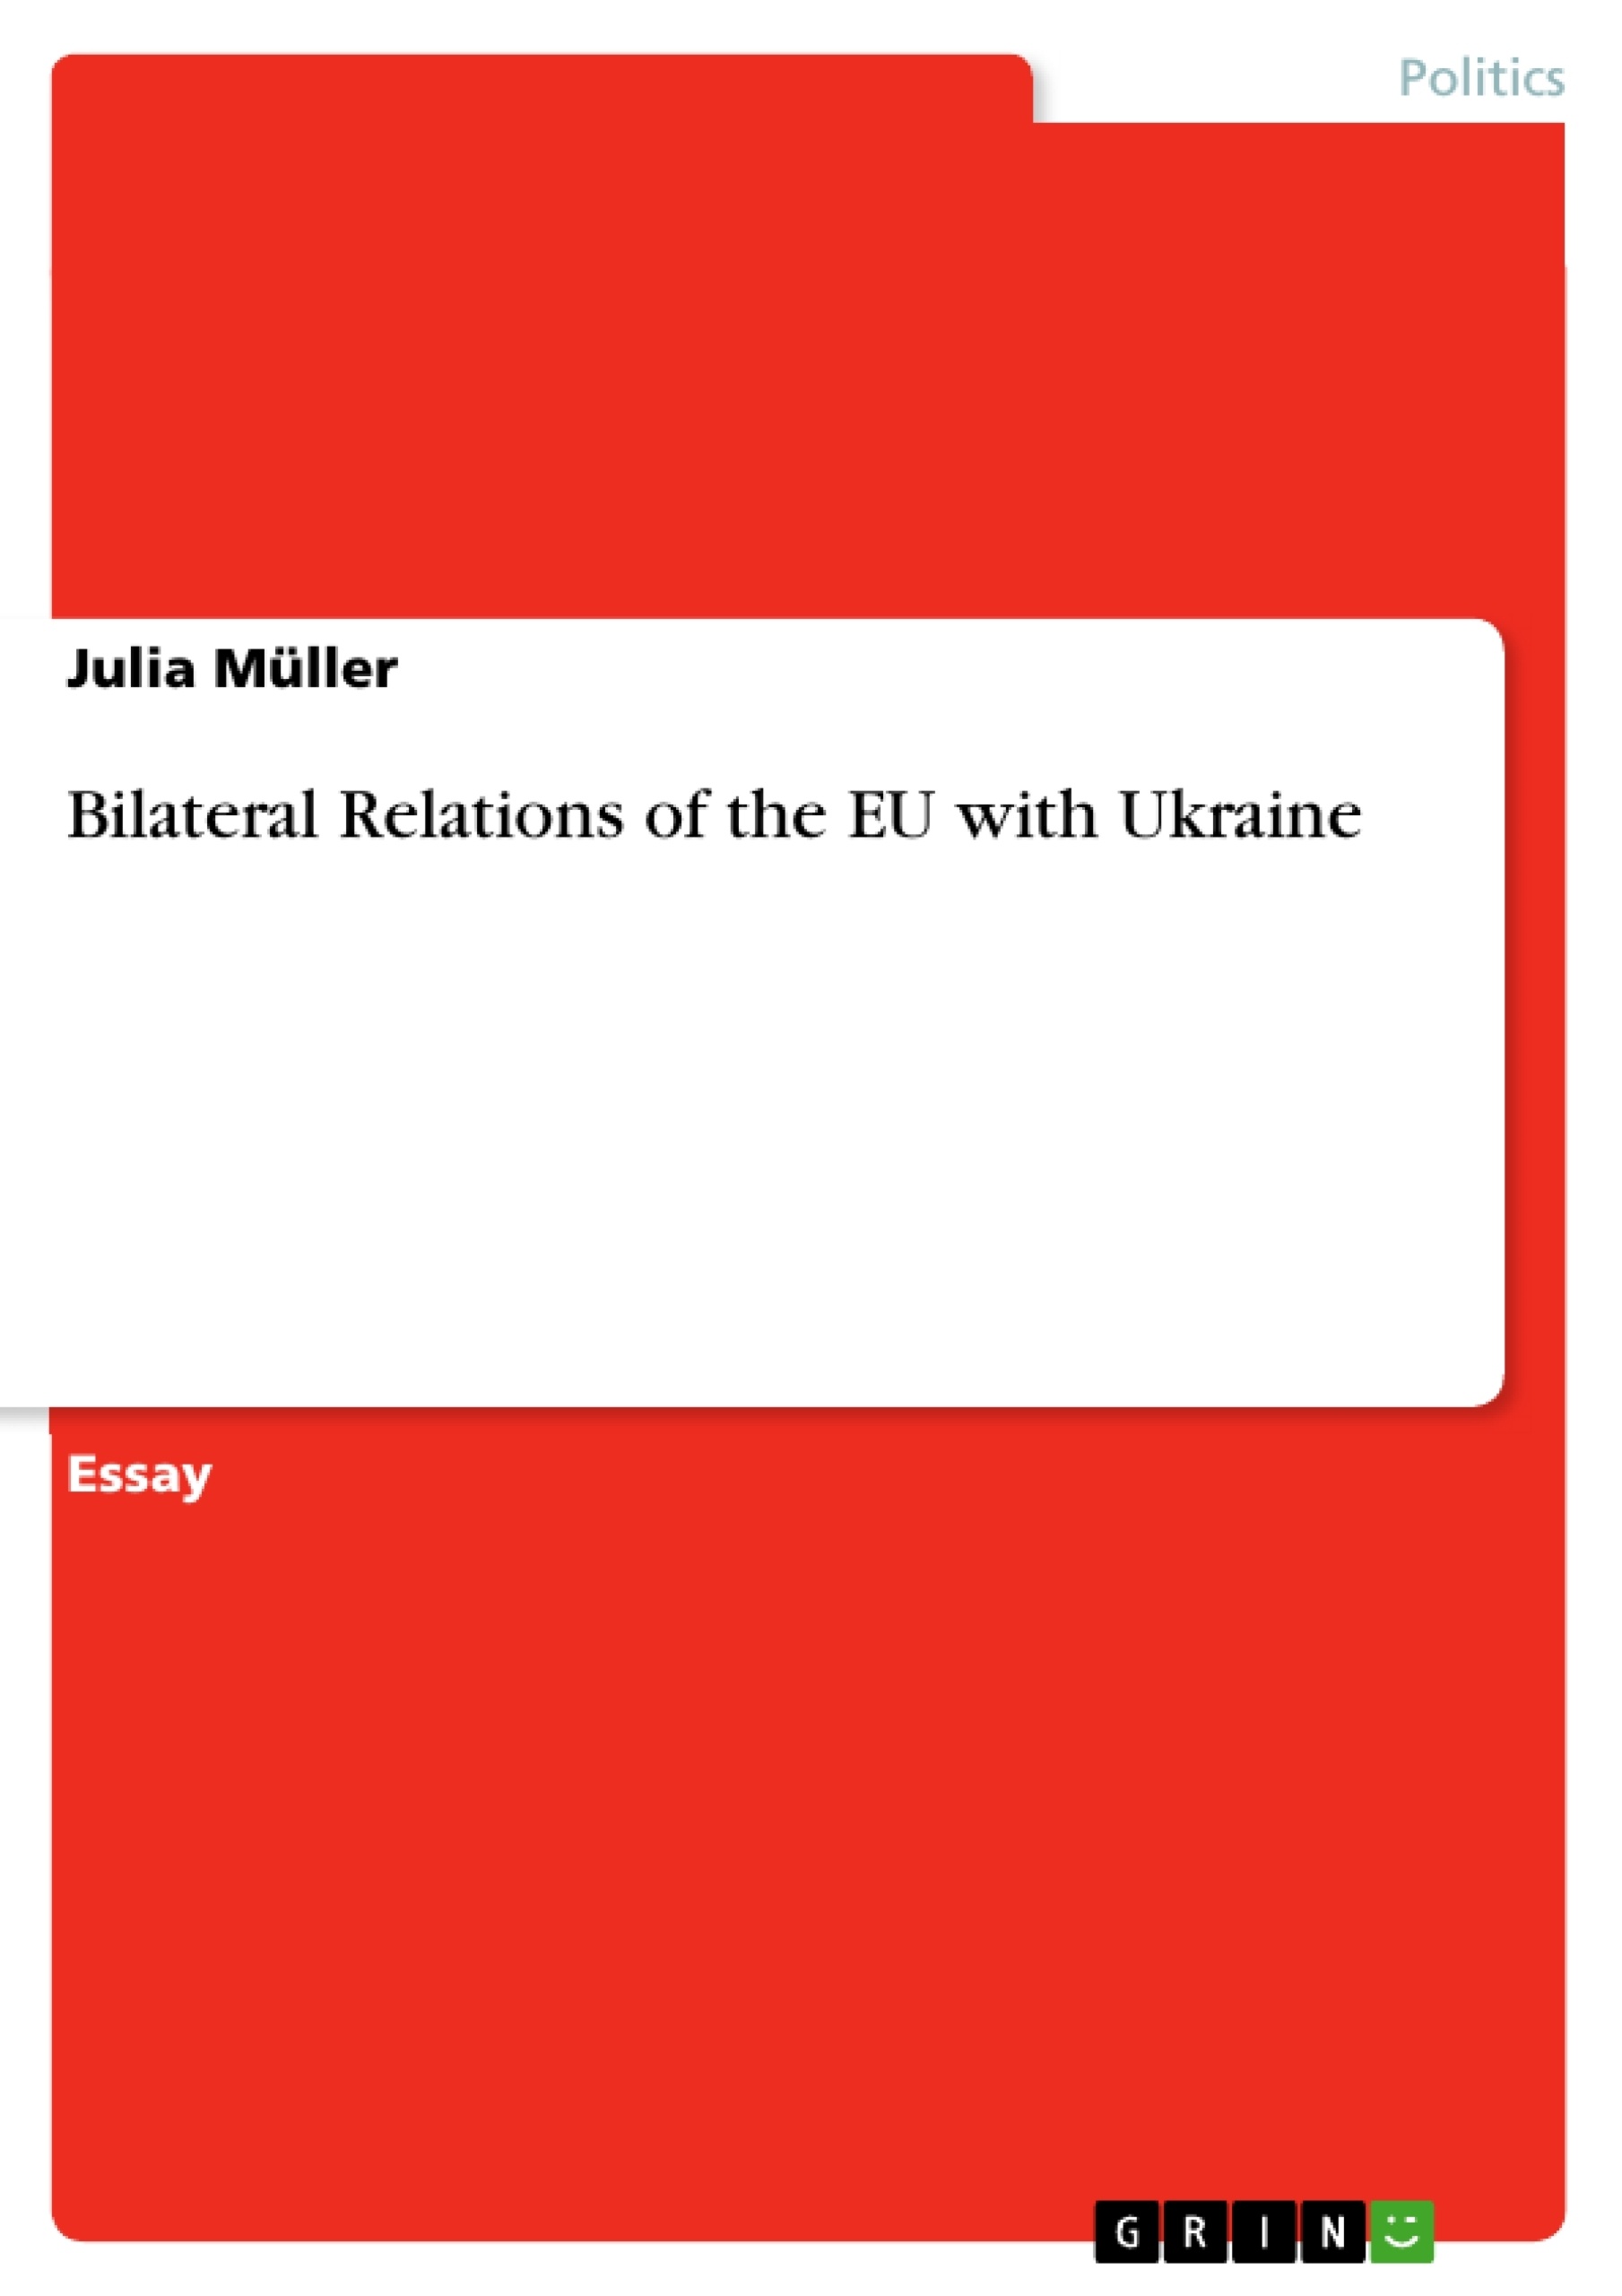 Title: Bilateral Relations of the EU with Ukraine